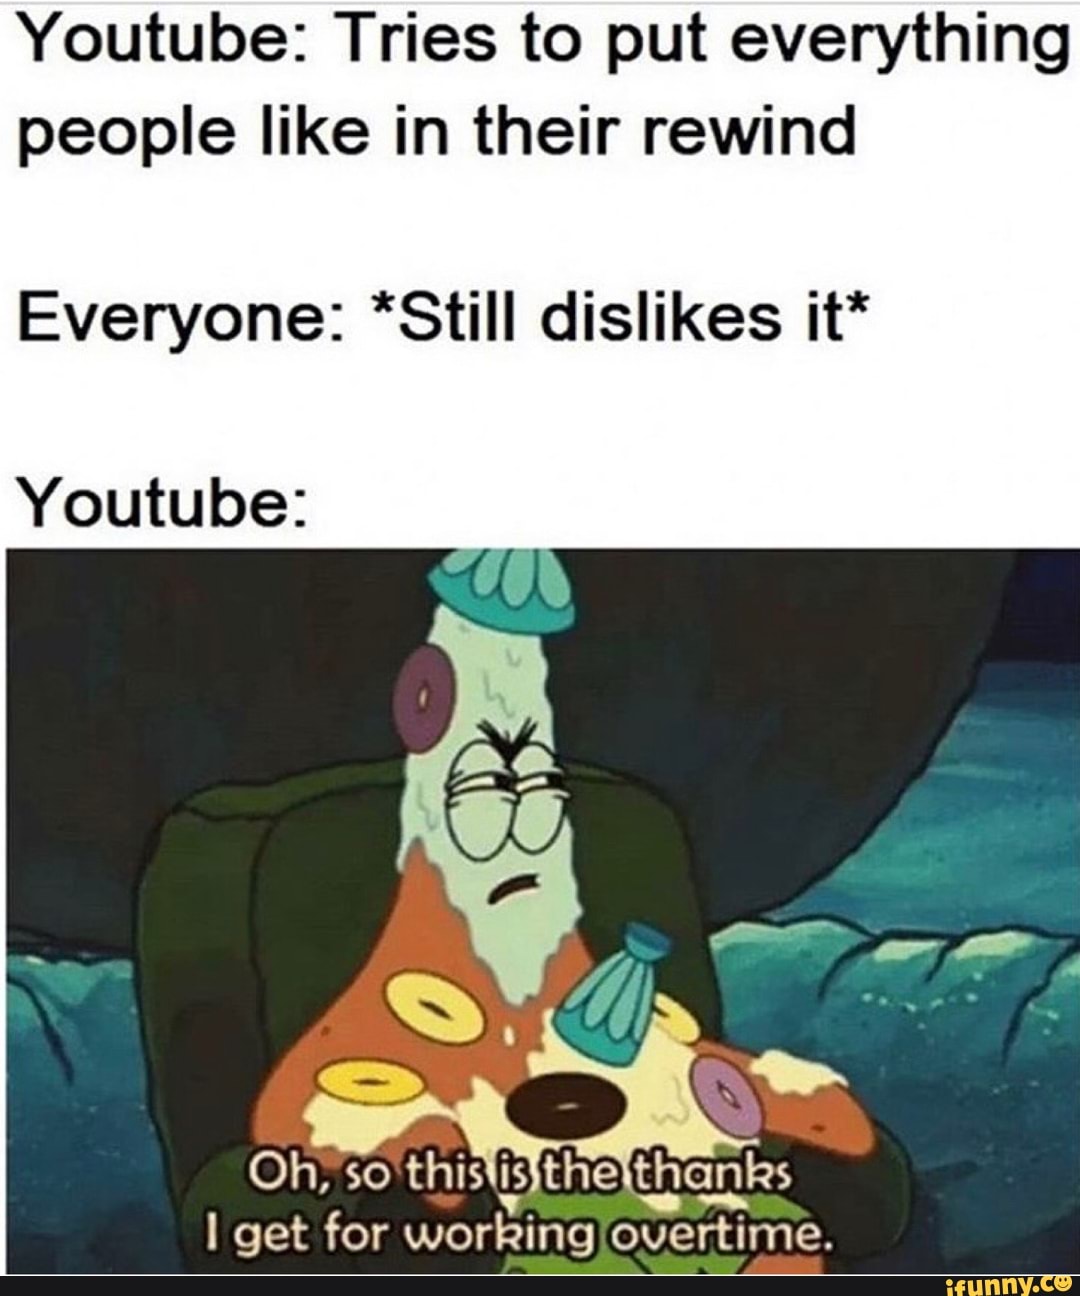 Youtube: Tries to put everything people like in their rewind Everyone